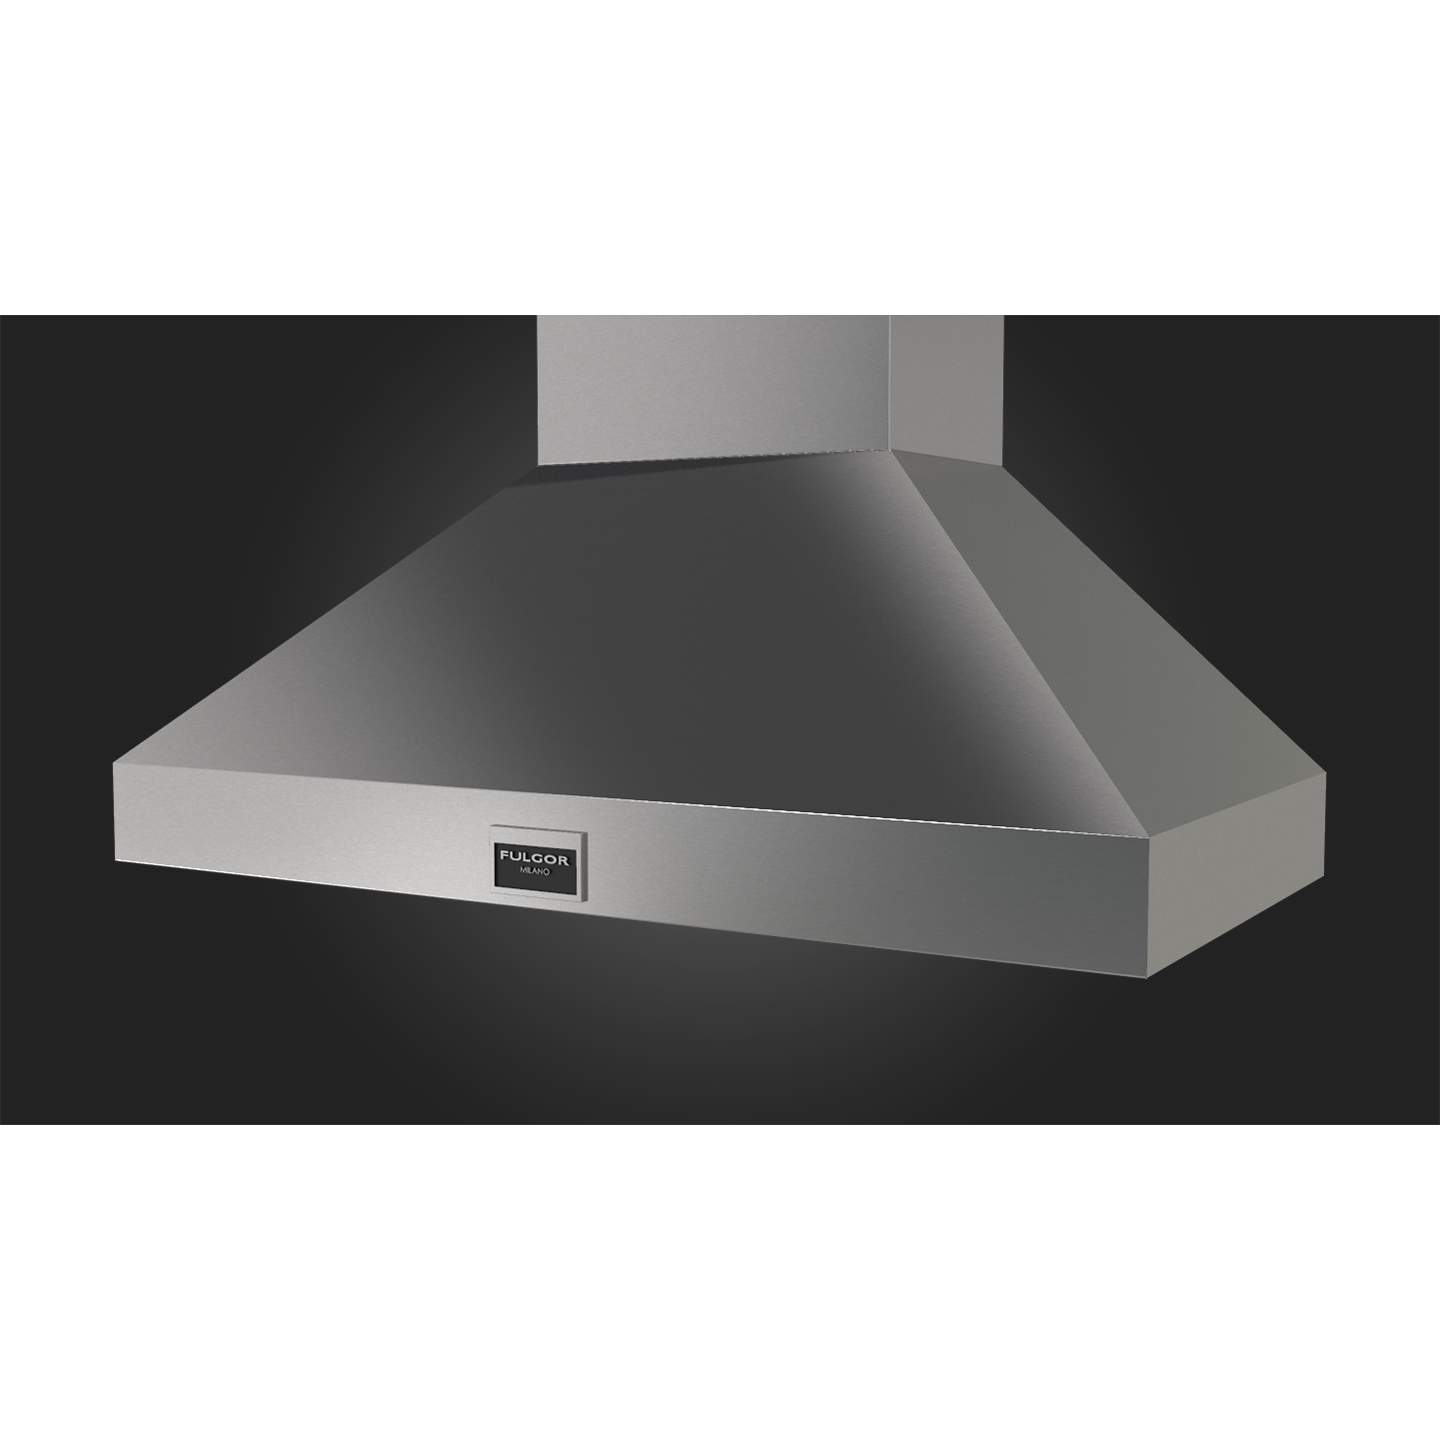 Fulgor Milano 48" Wall Mount Range Hood with 3-Speeds, 1000 CFM Blower Stainless Steel - F6PC48DS1